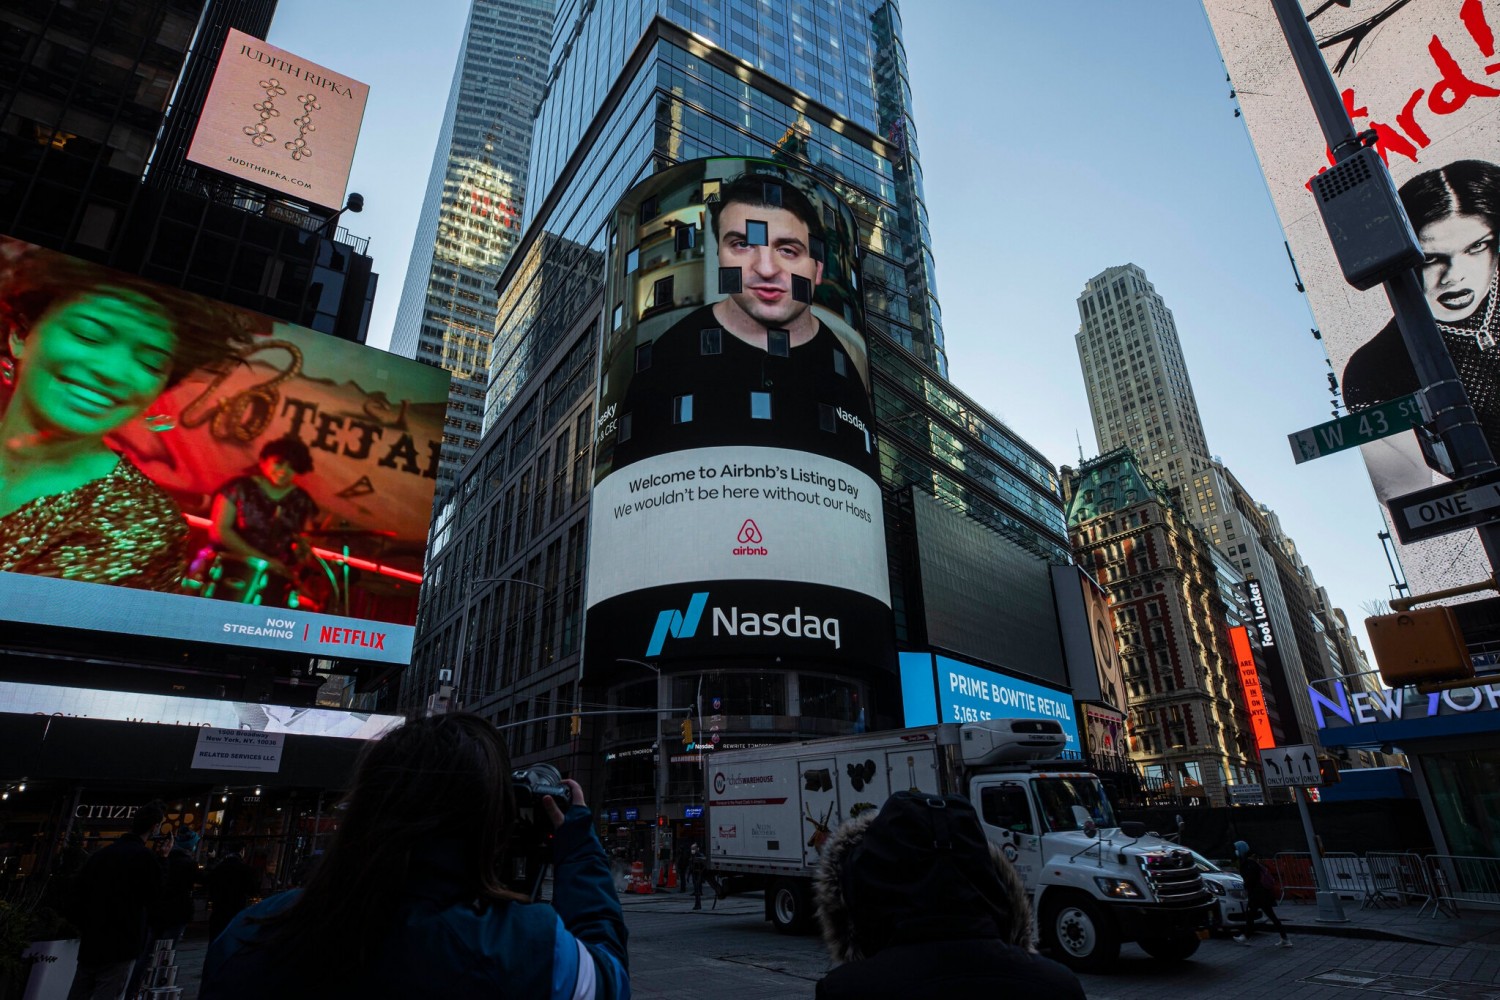 Brian Chesky, Airbnb’s chief executive,  on Nasdaq’s digital billboard in Times Square on Thursday.Credit...Hiroko Masuike/The New York Times